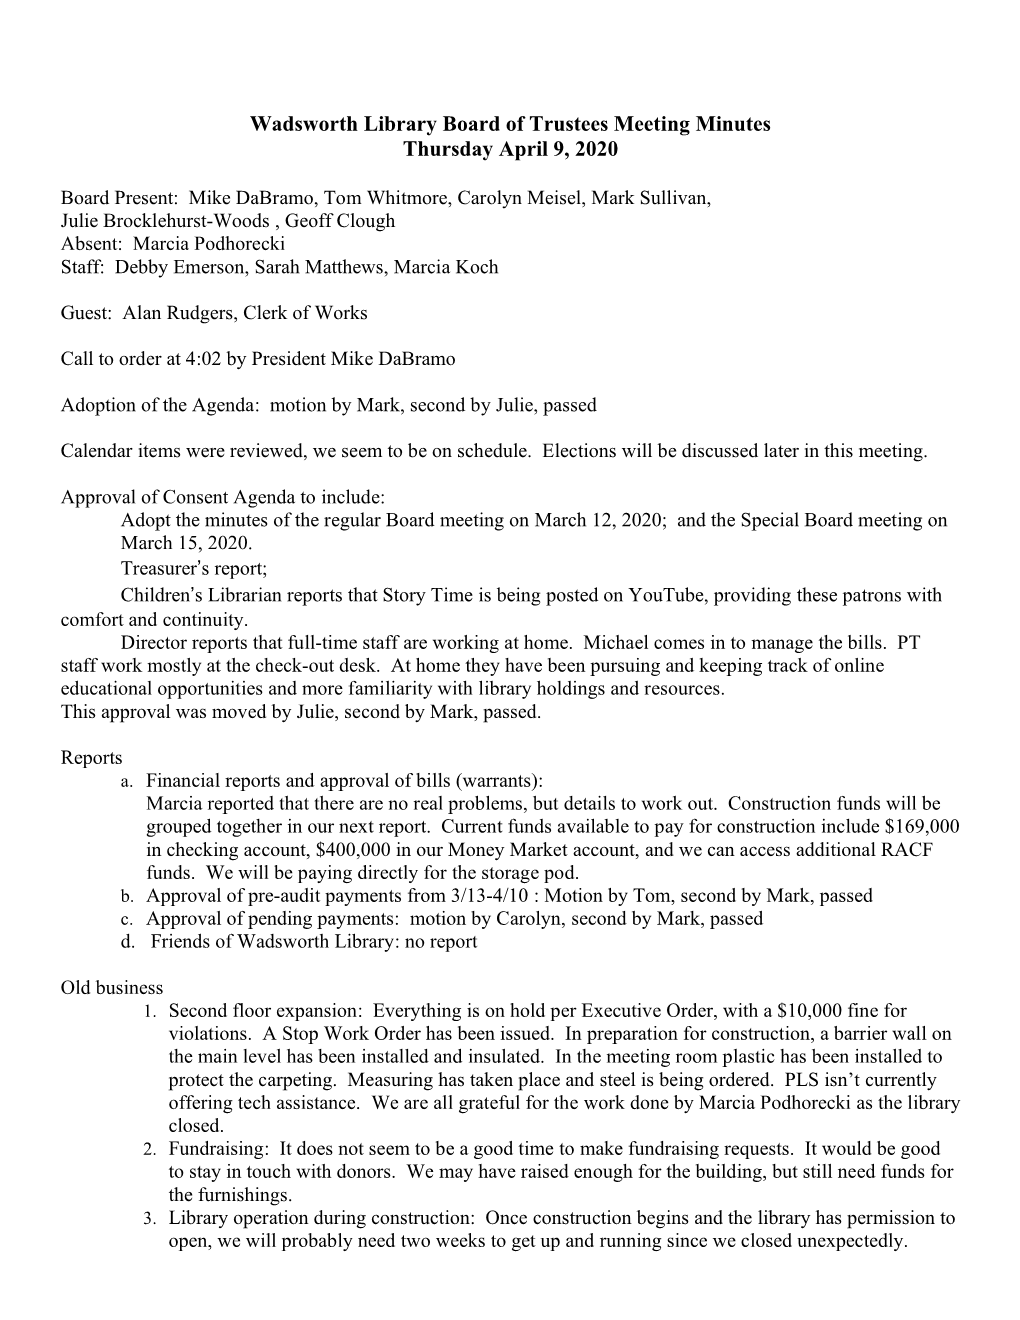 Wadsworth Library Board of Trustees Meeting Minutes Thursday April 9, 2020